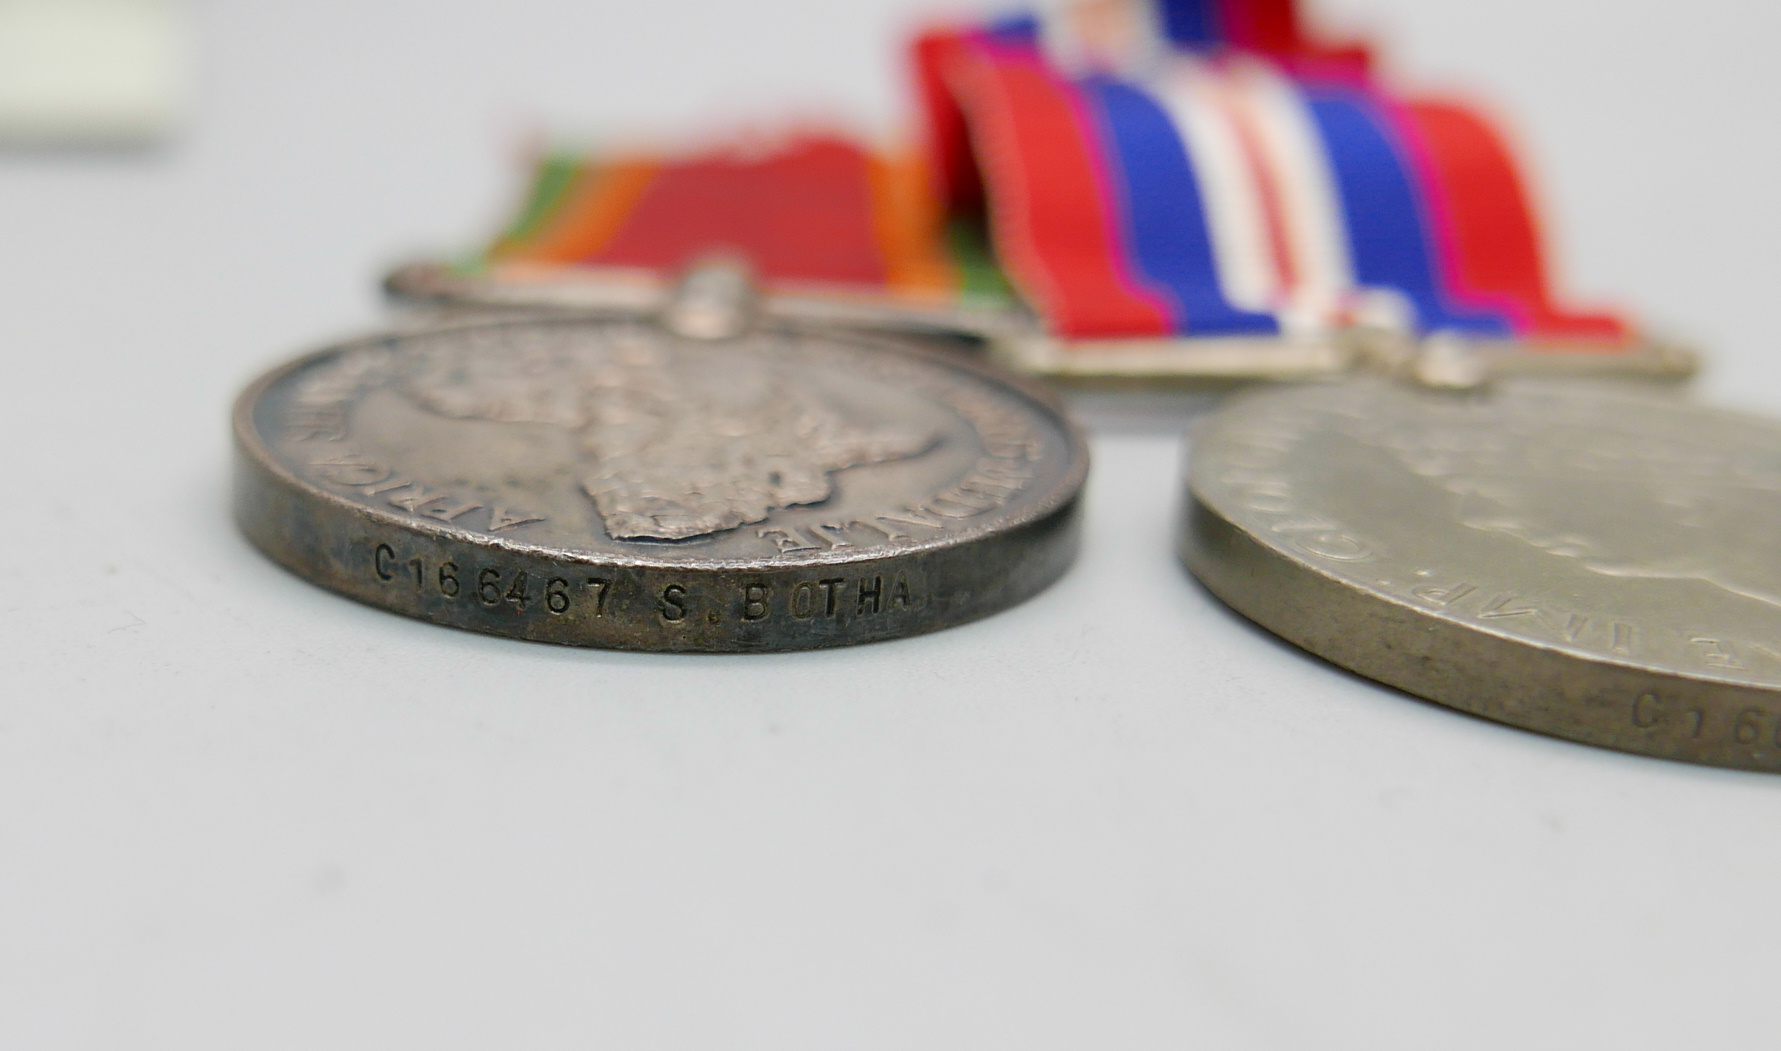 Four WWII medals including Africa Service Medal to C166467 S. Botha and leaflet - Image 3 of 4